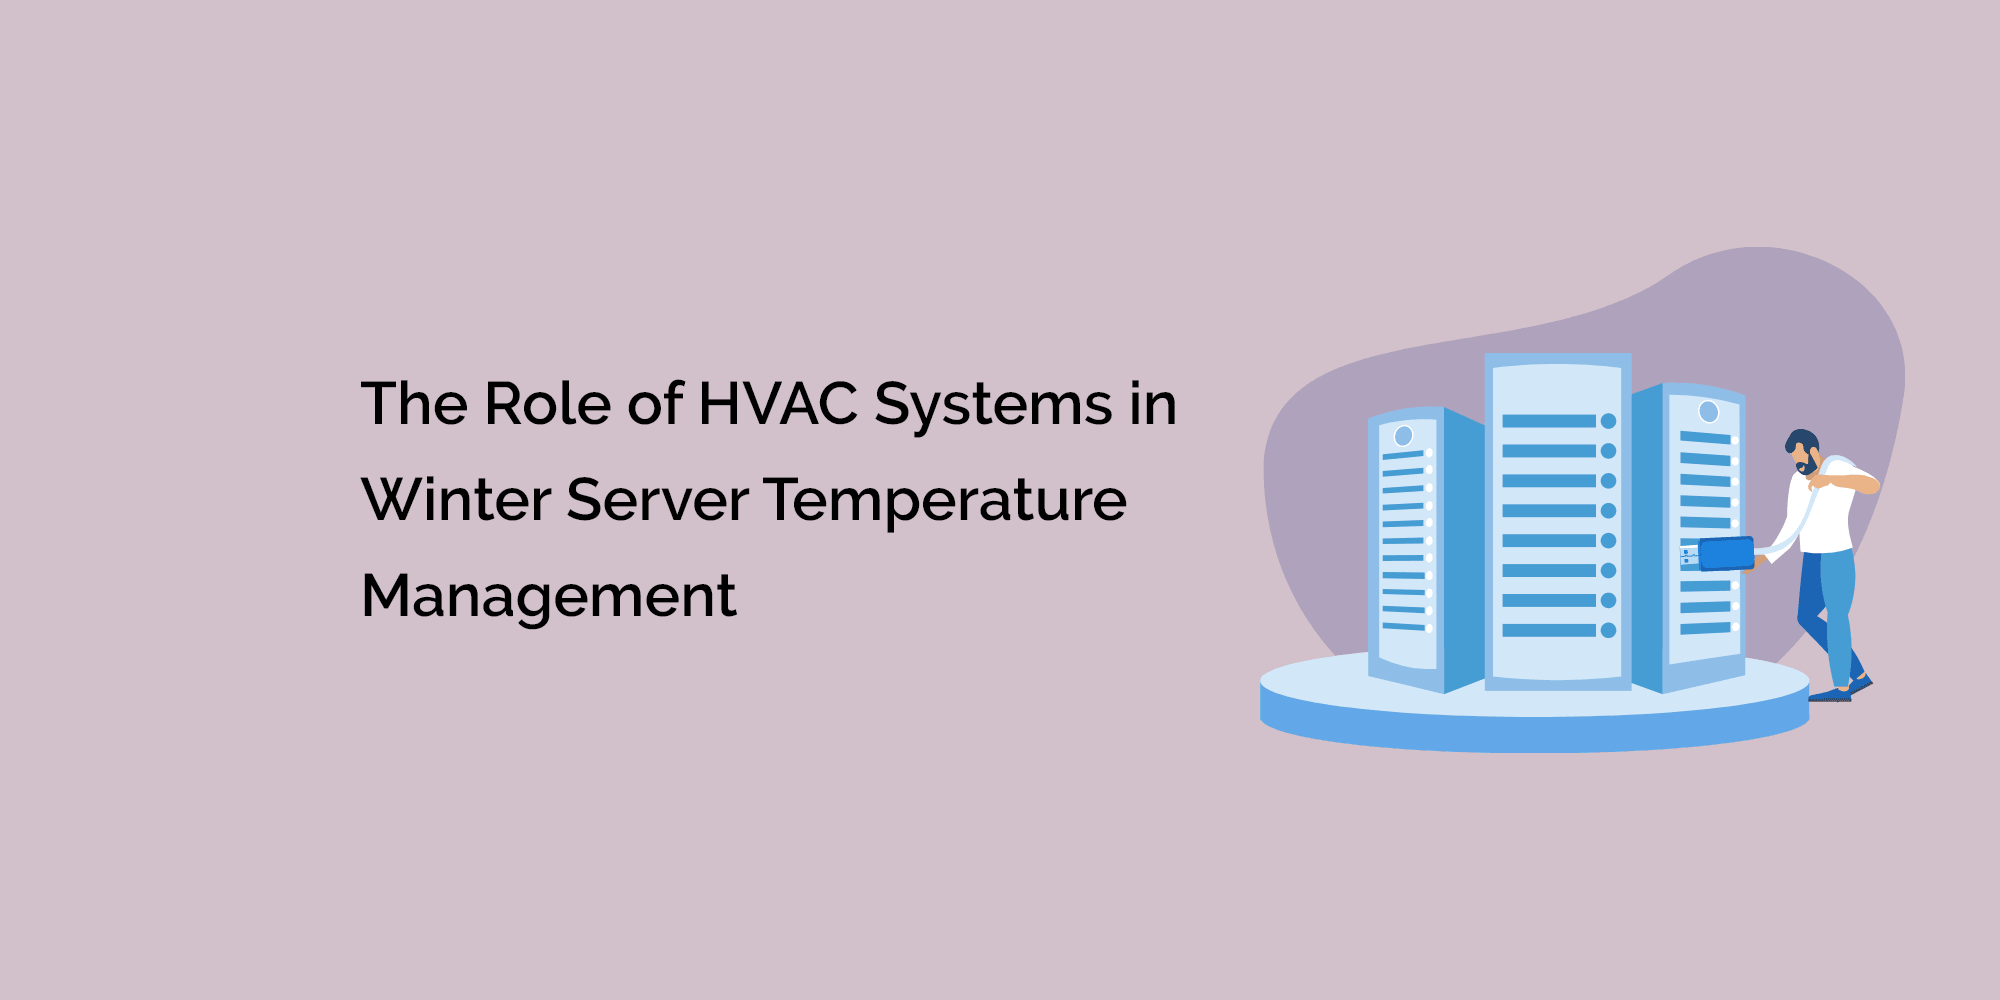 The Role of HVAC Systems in Winter Server Temperature Management